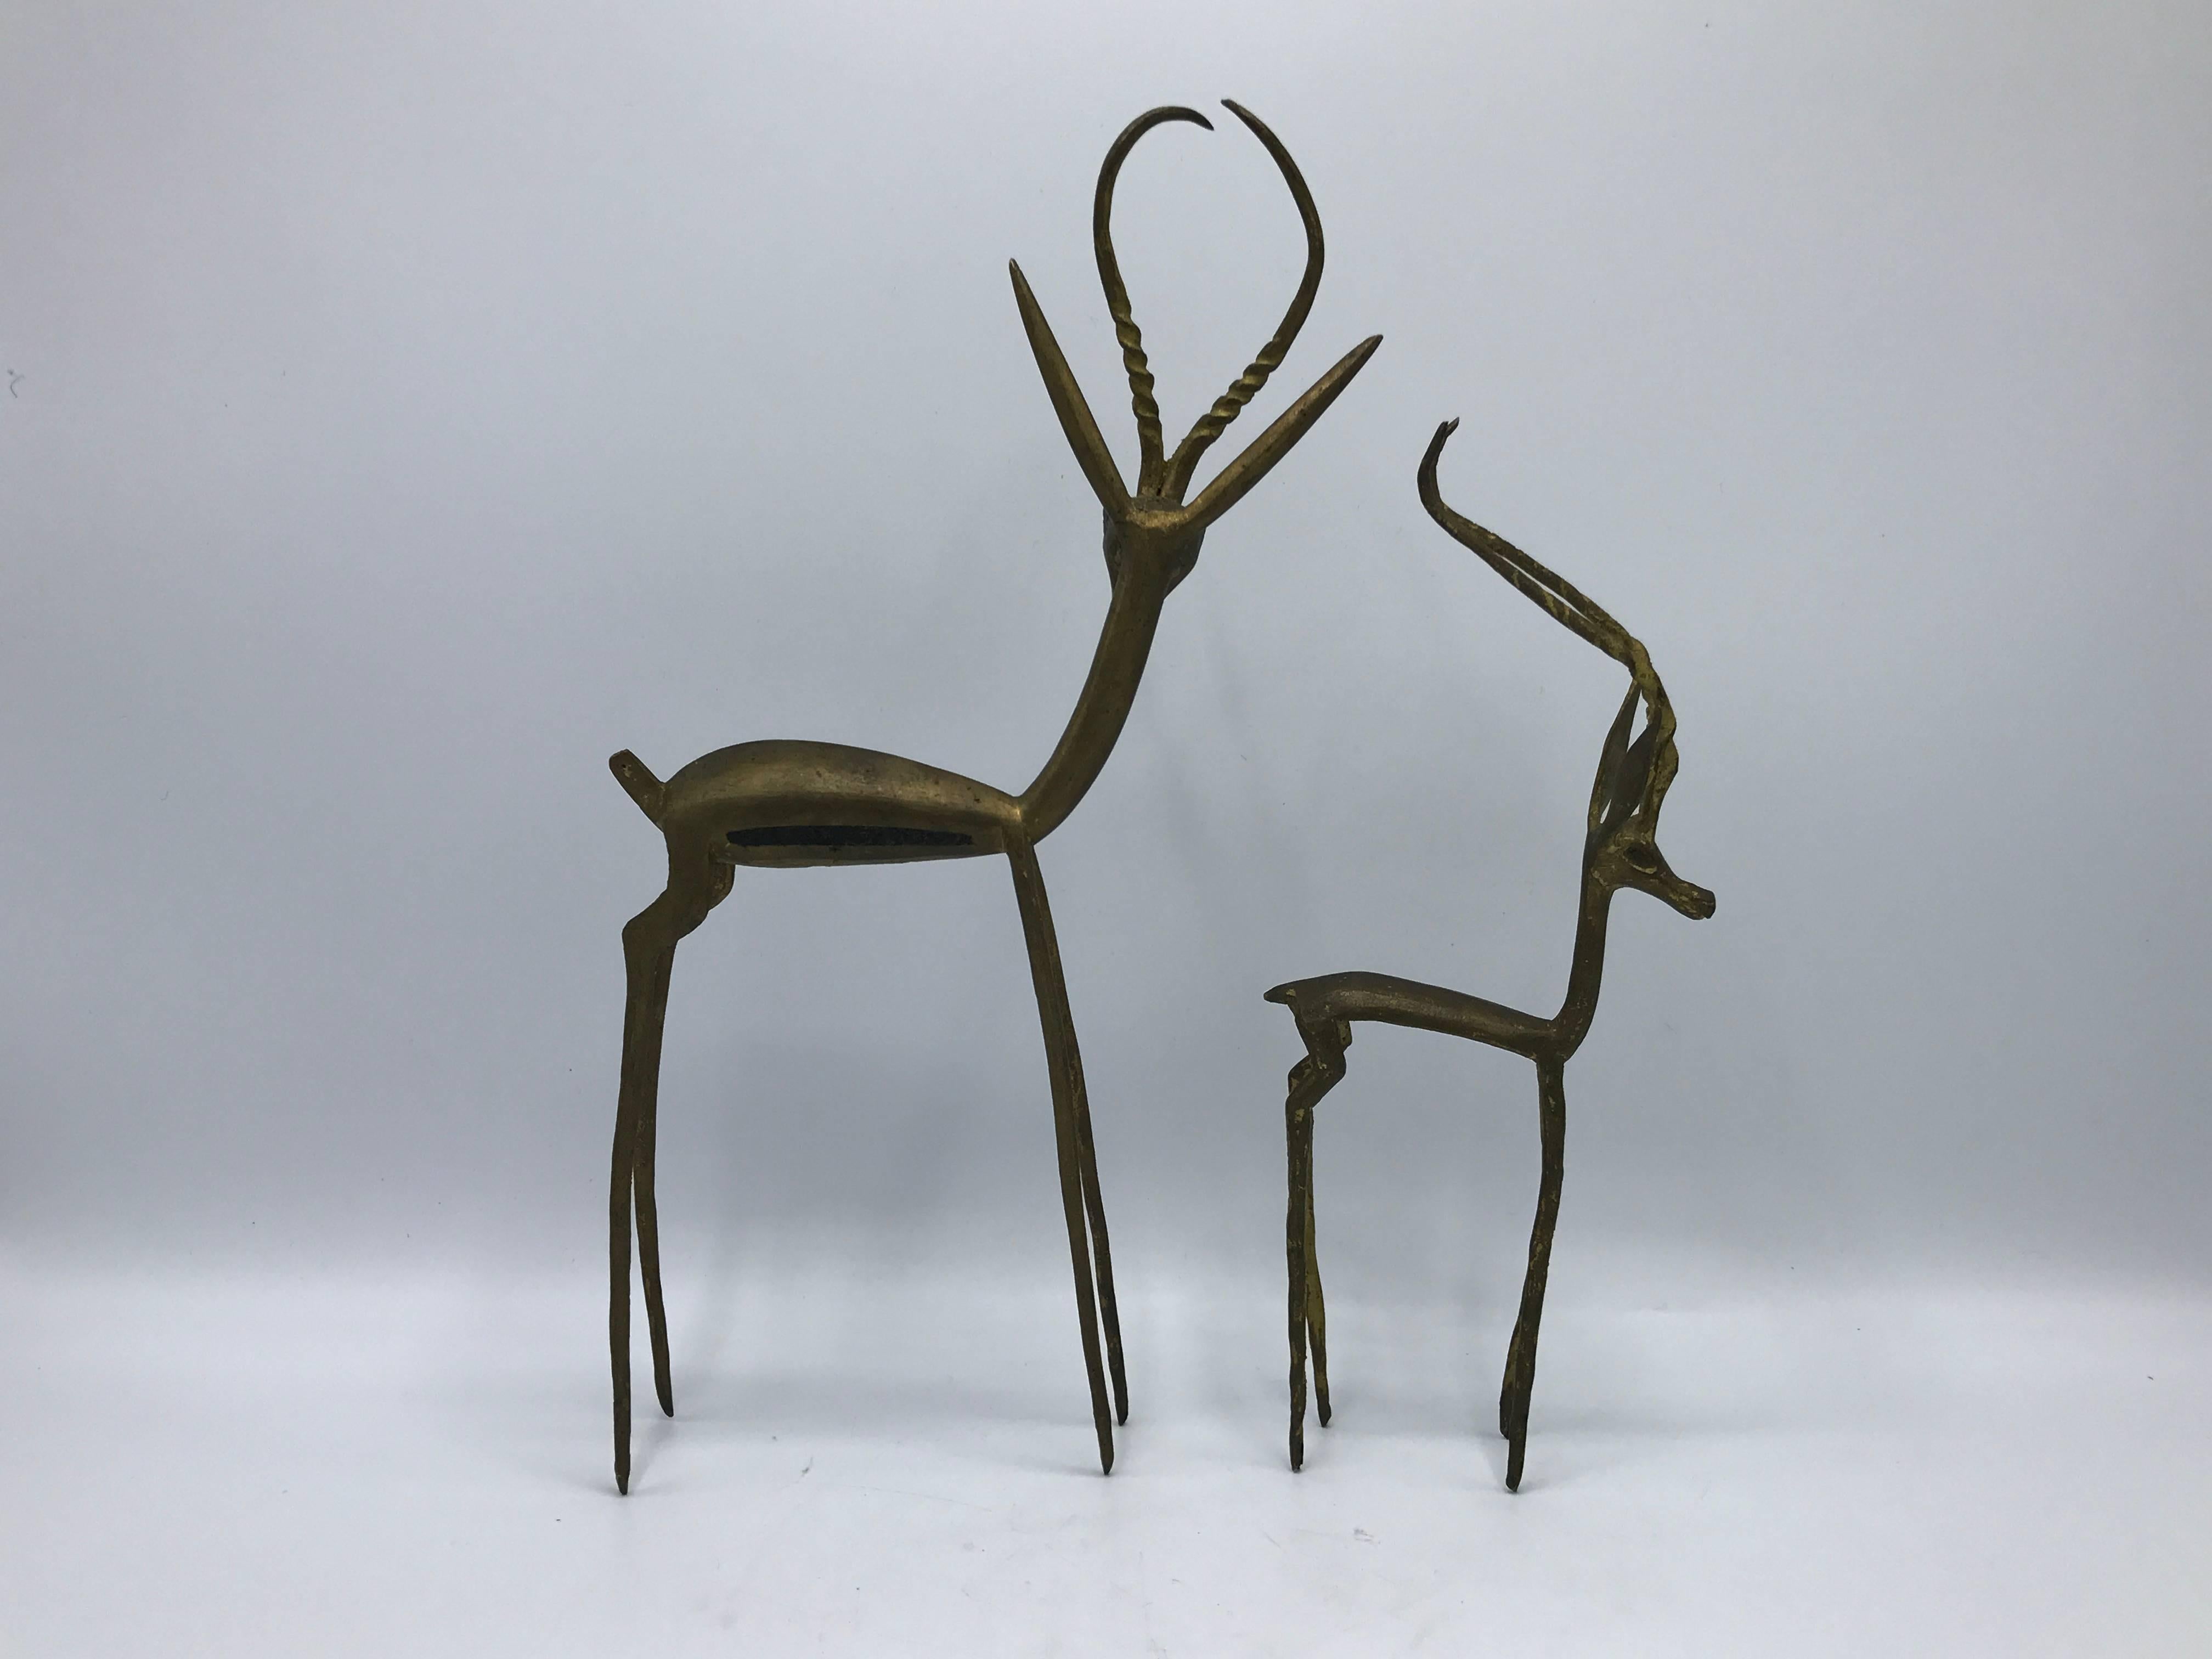 Offered is a gorgeous pair of 1960s solid-brass, modernist gazelle sculptures. 

Measures: Large 2